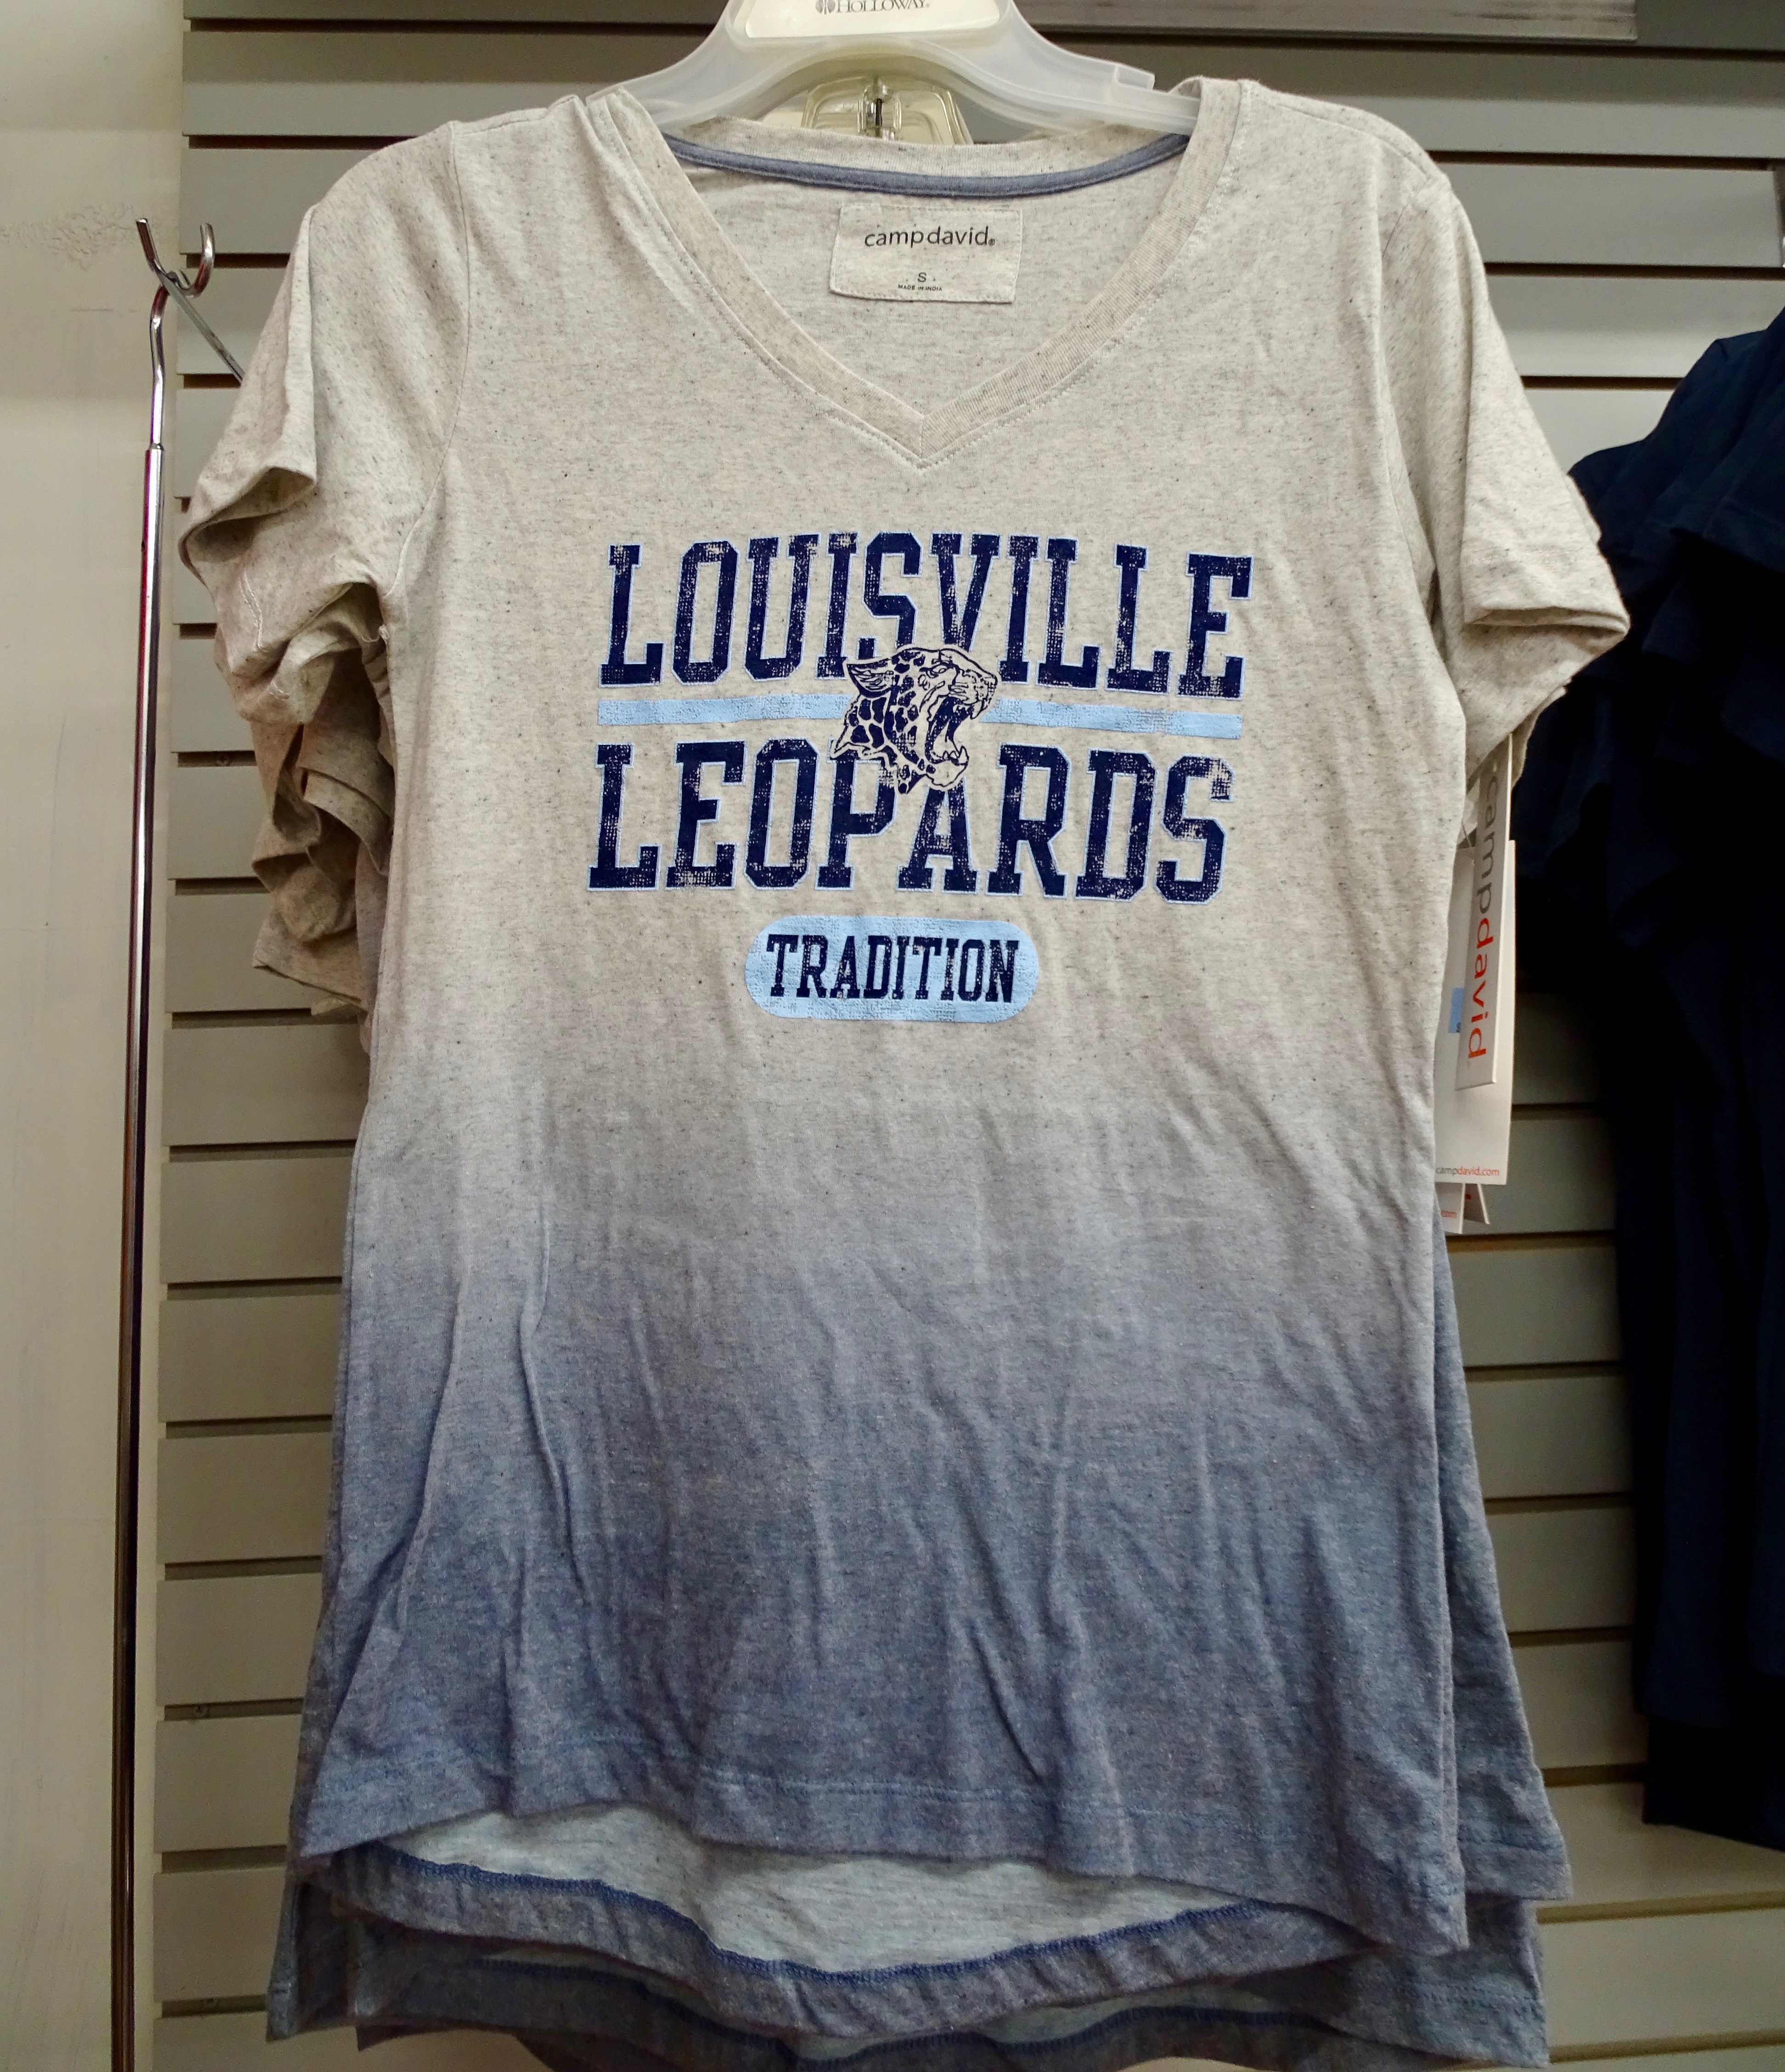 LOUISVILLE LEOPARDS youth lrg T shirt football tradition OHIO kids beat-up  tee